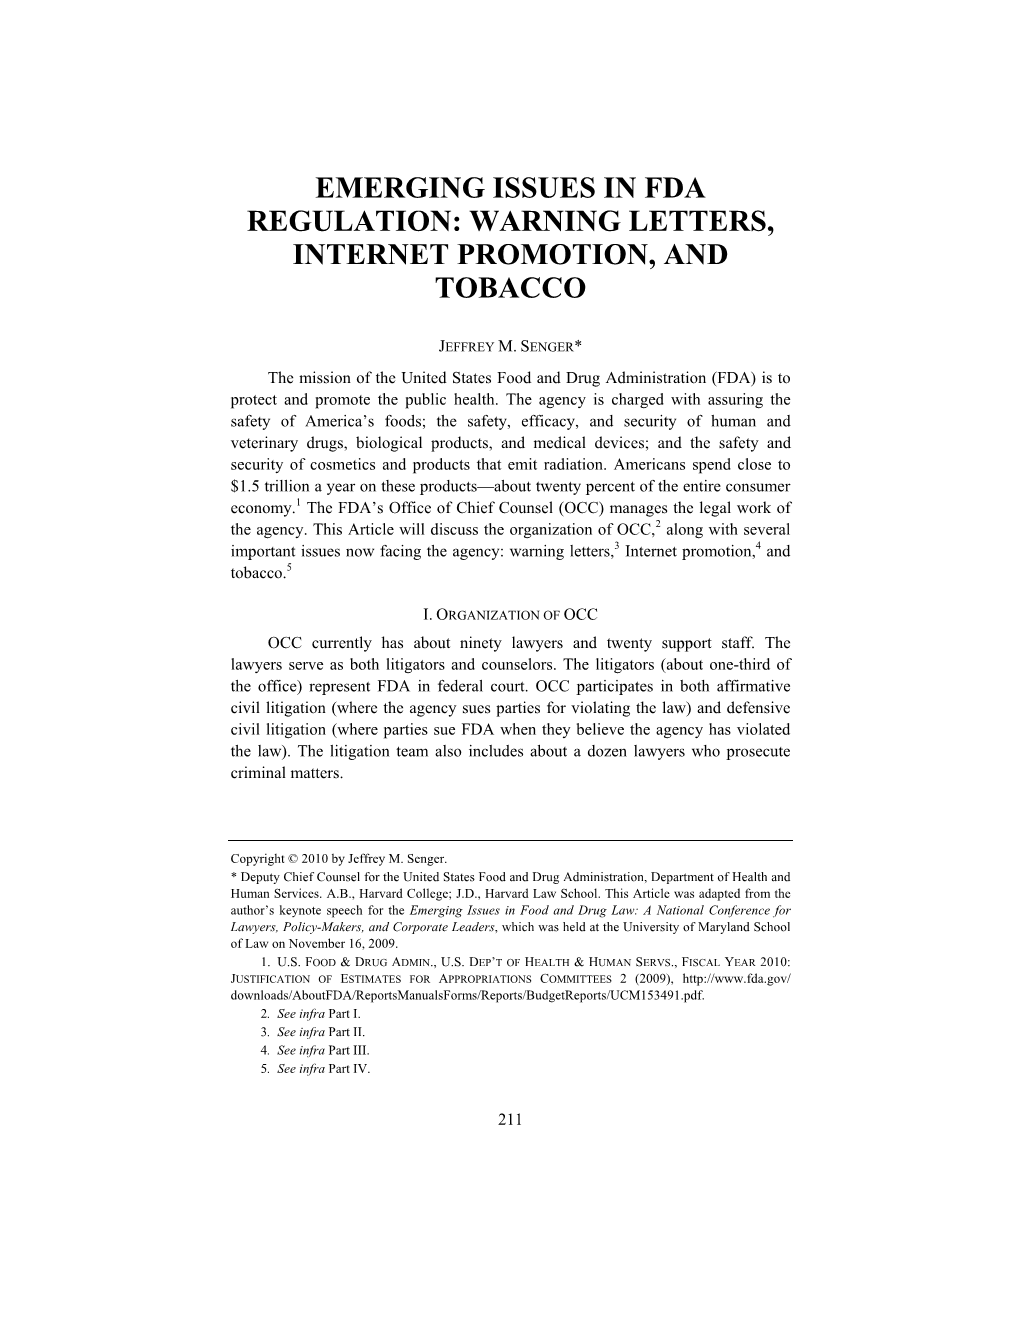 Emerging Issues in Fda Regulation: Warning Letters, Internet Promotion, and Tobacco